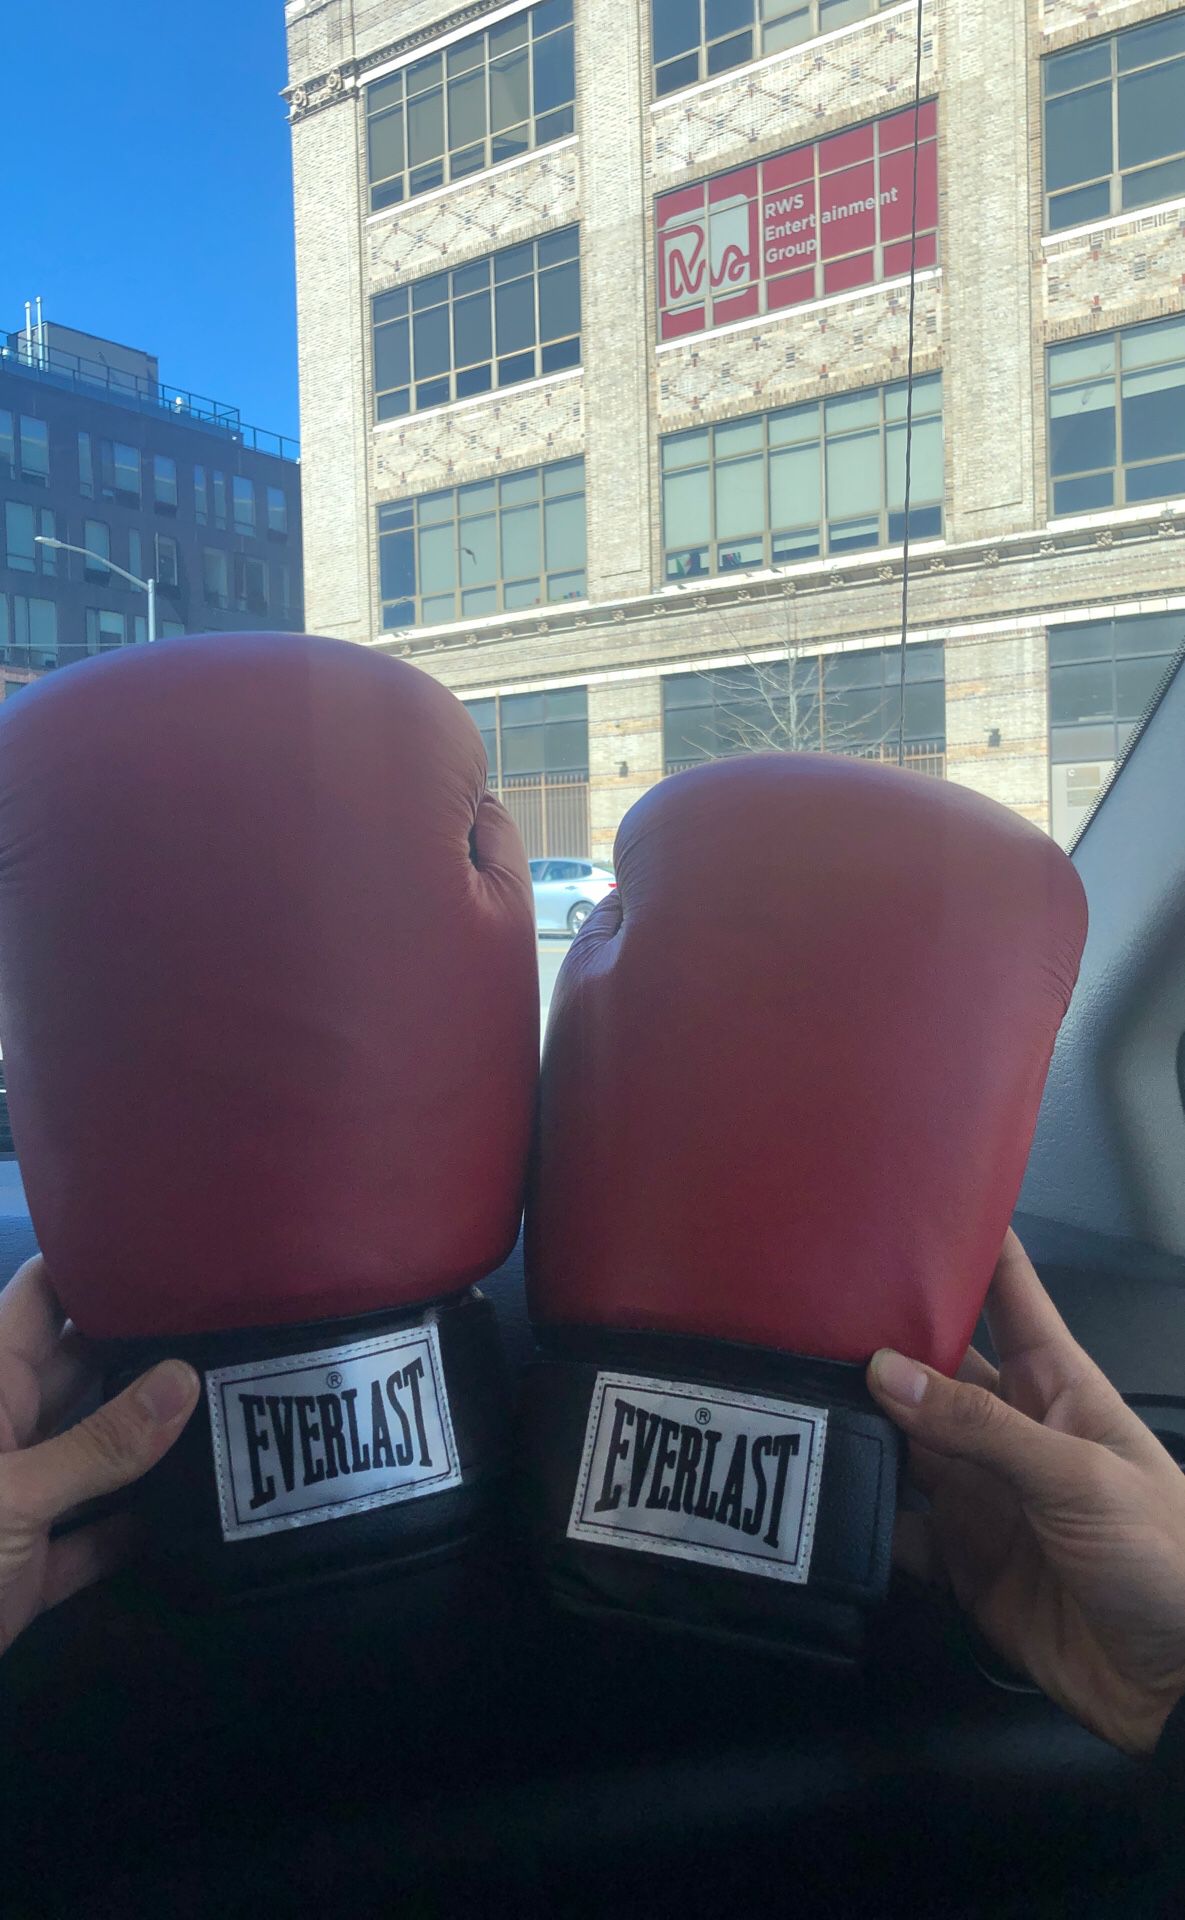 BOXING GLOVES EVERLAST 9/10 condition